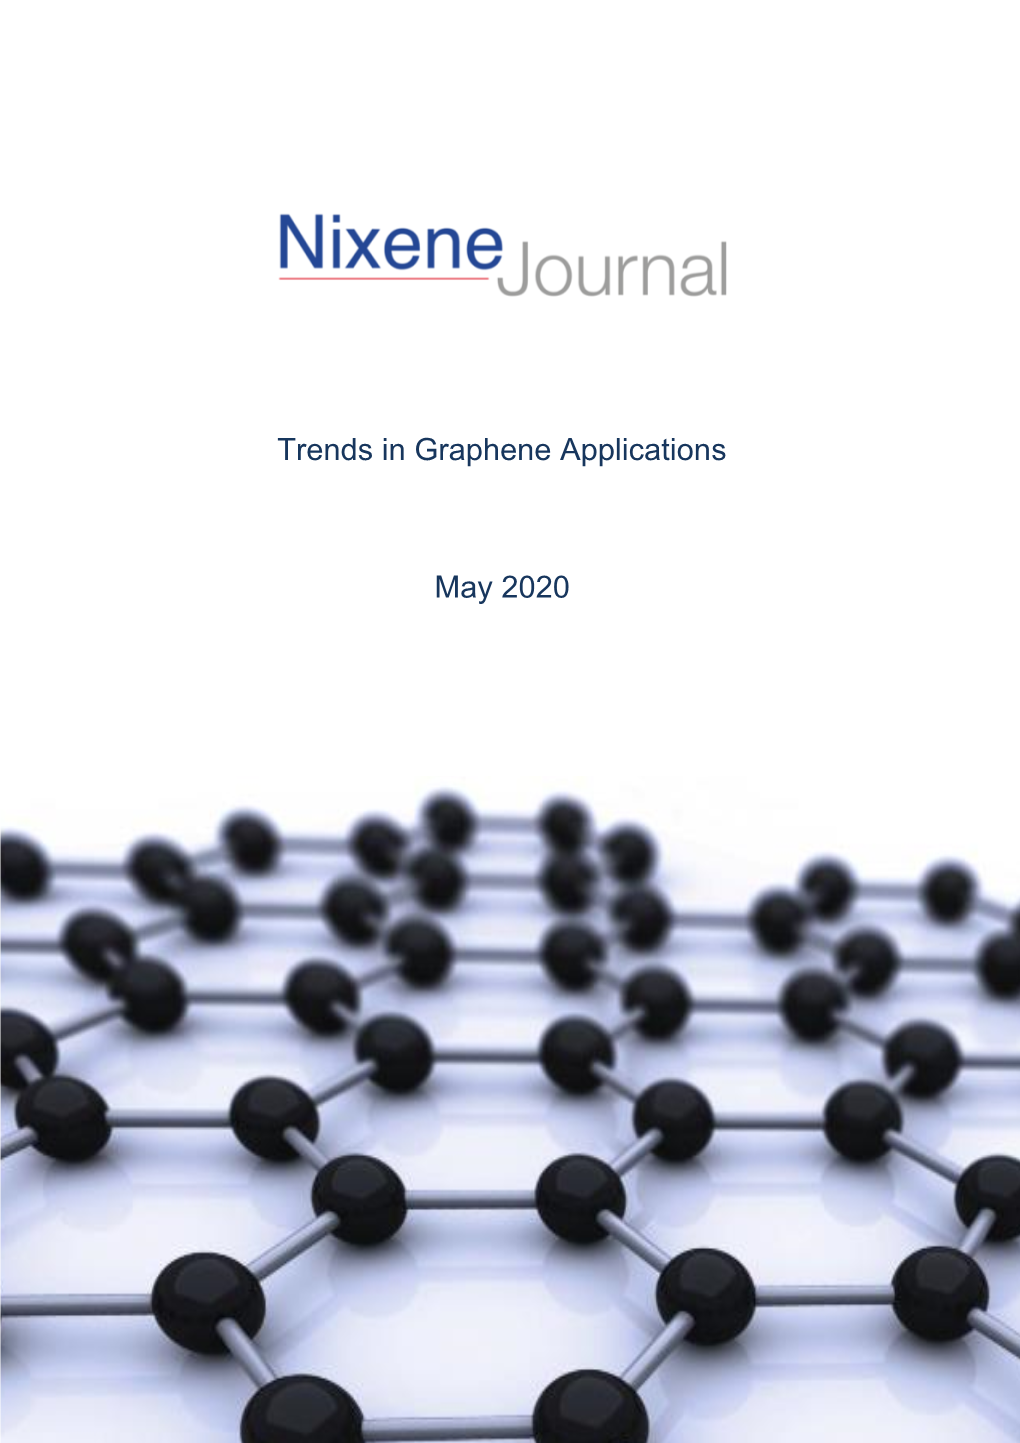 Trends in Graphene Applications